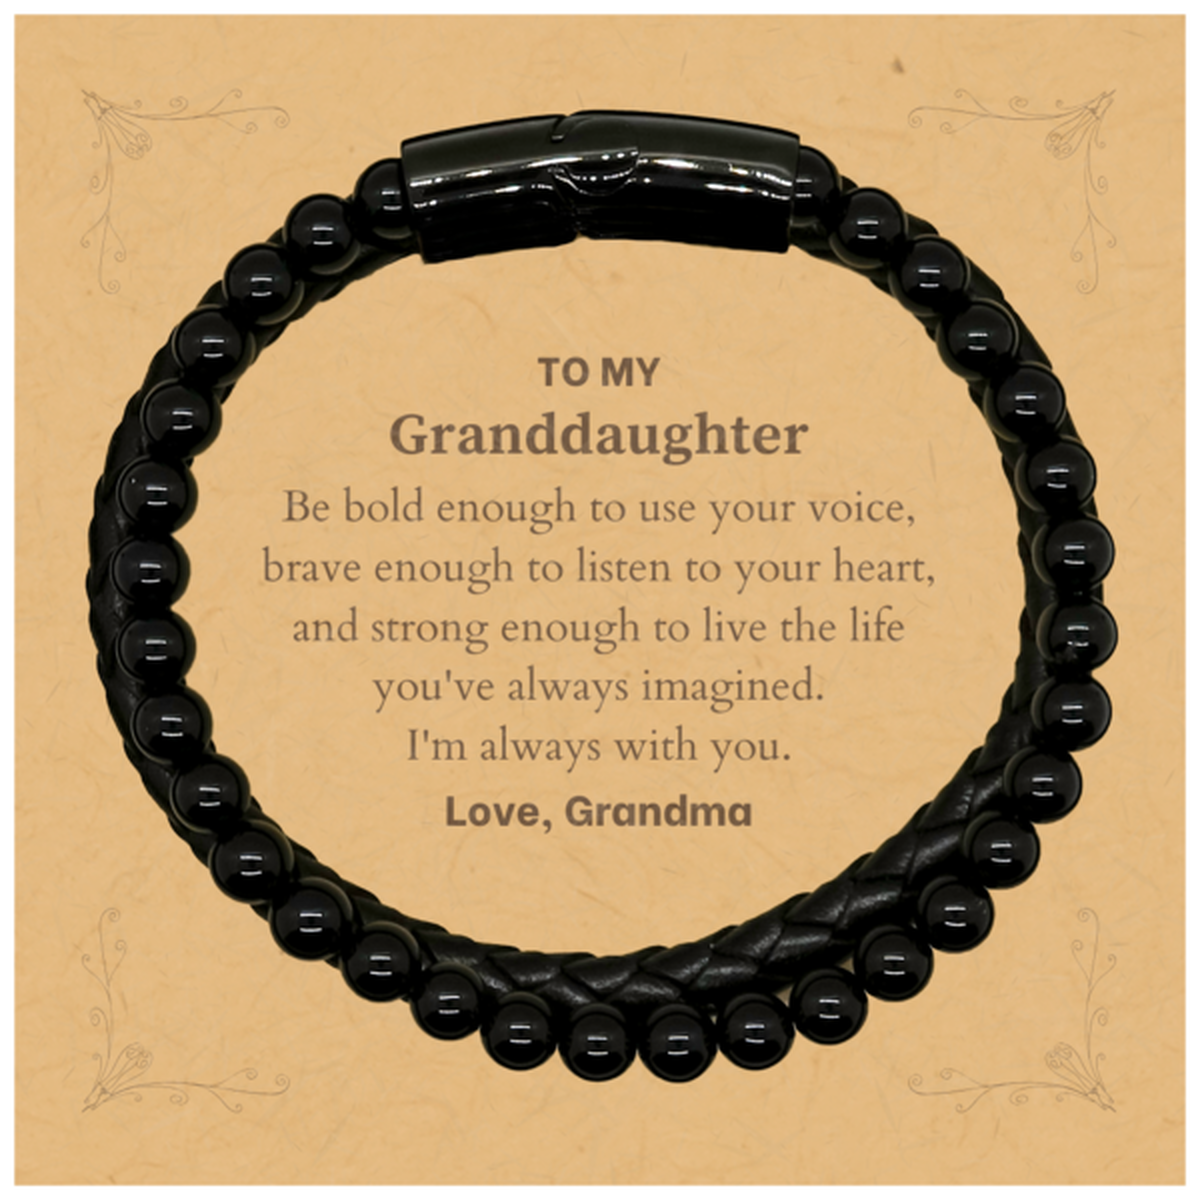 Keepsake Granddaughter Stone Leather Bracelets Gift Idea Graduation Christmas Birthday Granddaughter from Grandma, Granddaughter Be bold enough to use your voice, brave enough to listen to your heart. Love, Grandma